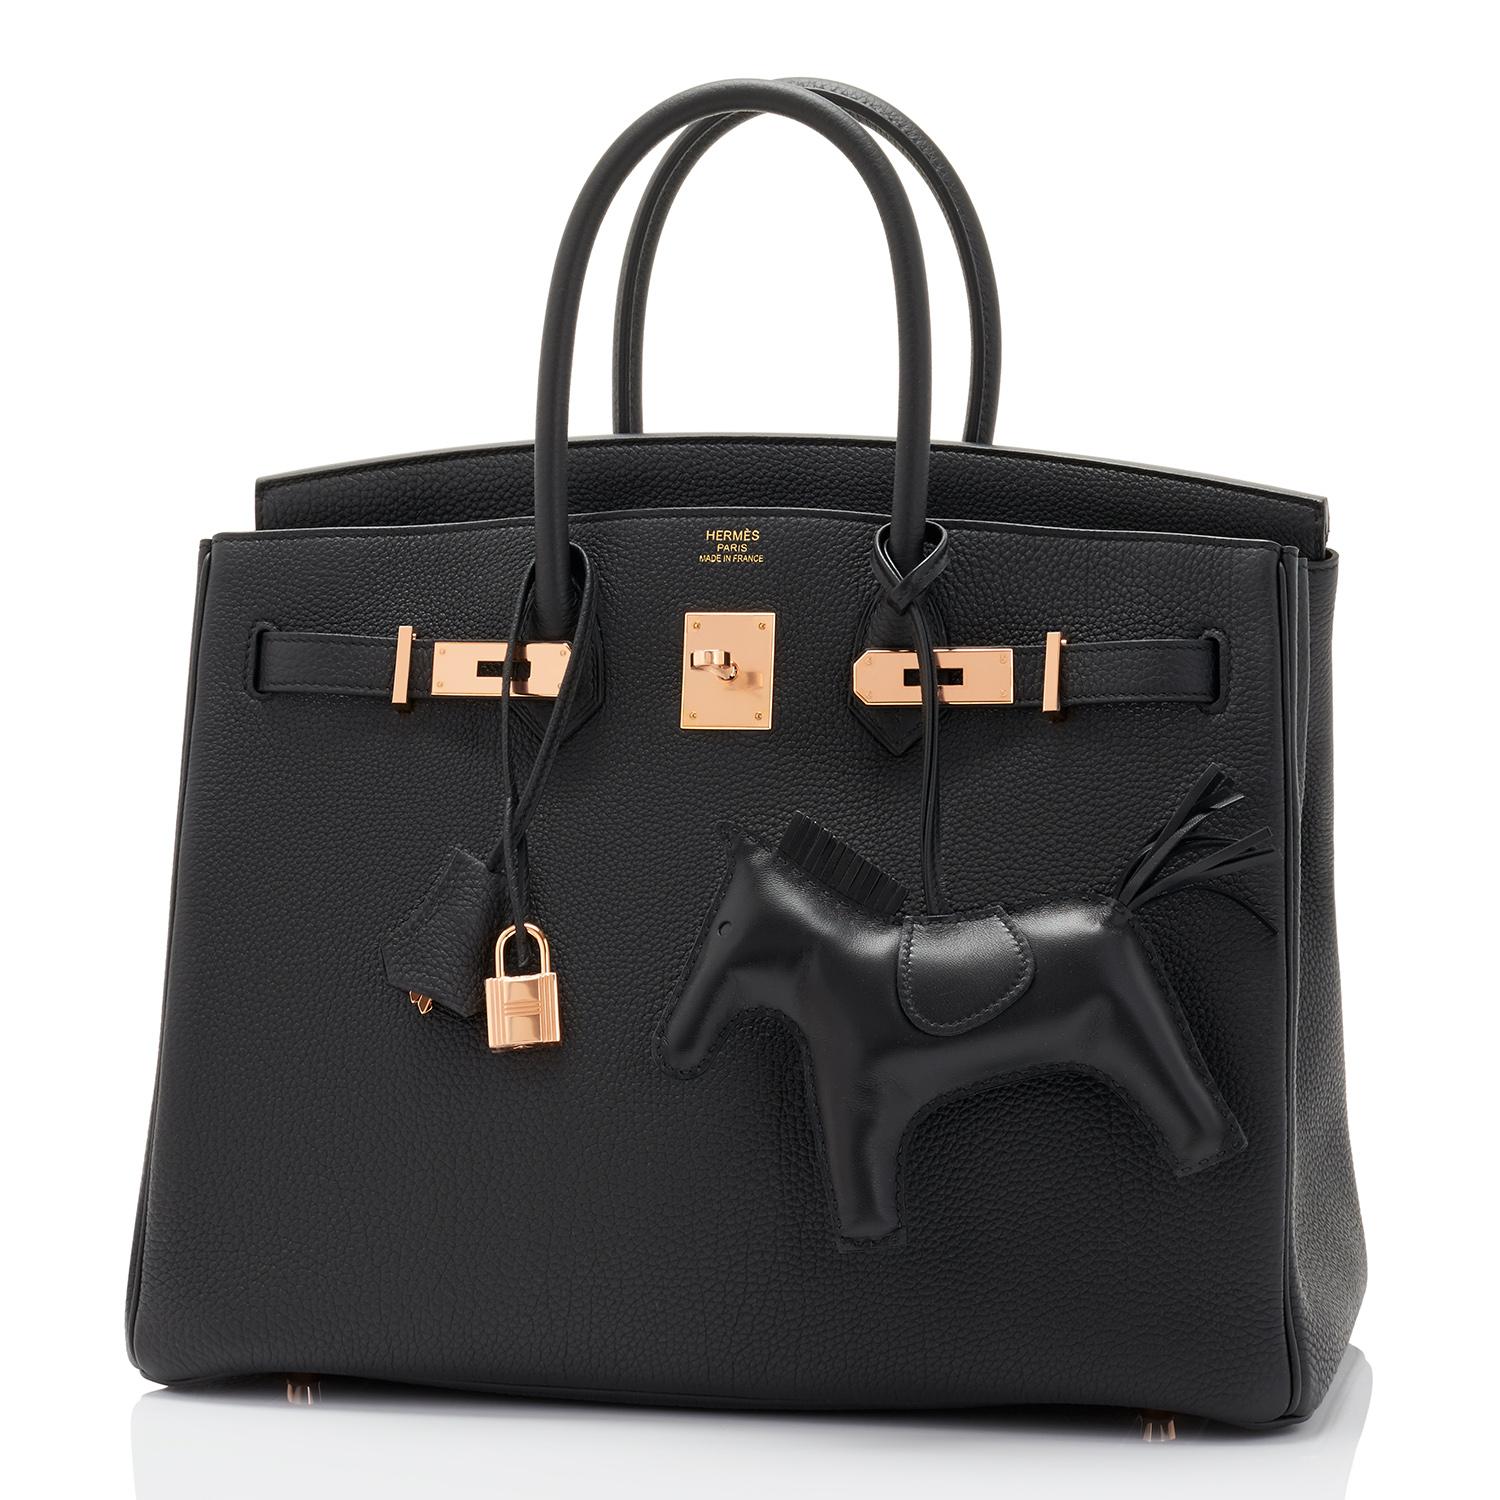 Hermes Black Togo 35cm Birkin Rose Gold Hardware Power Birkin D Stamp 2019
Brand New in Box. Store fresh. Pristine Condition (with plastic on hardware). 
Just purchased from Hermes store; bag bears new 2019 interior D stamp.
Perfect gift! Comes with